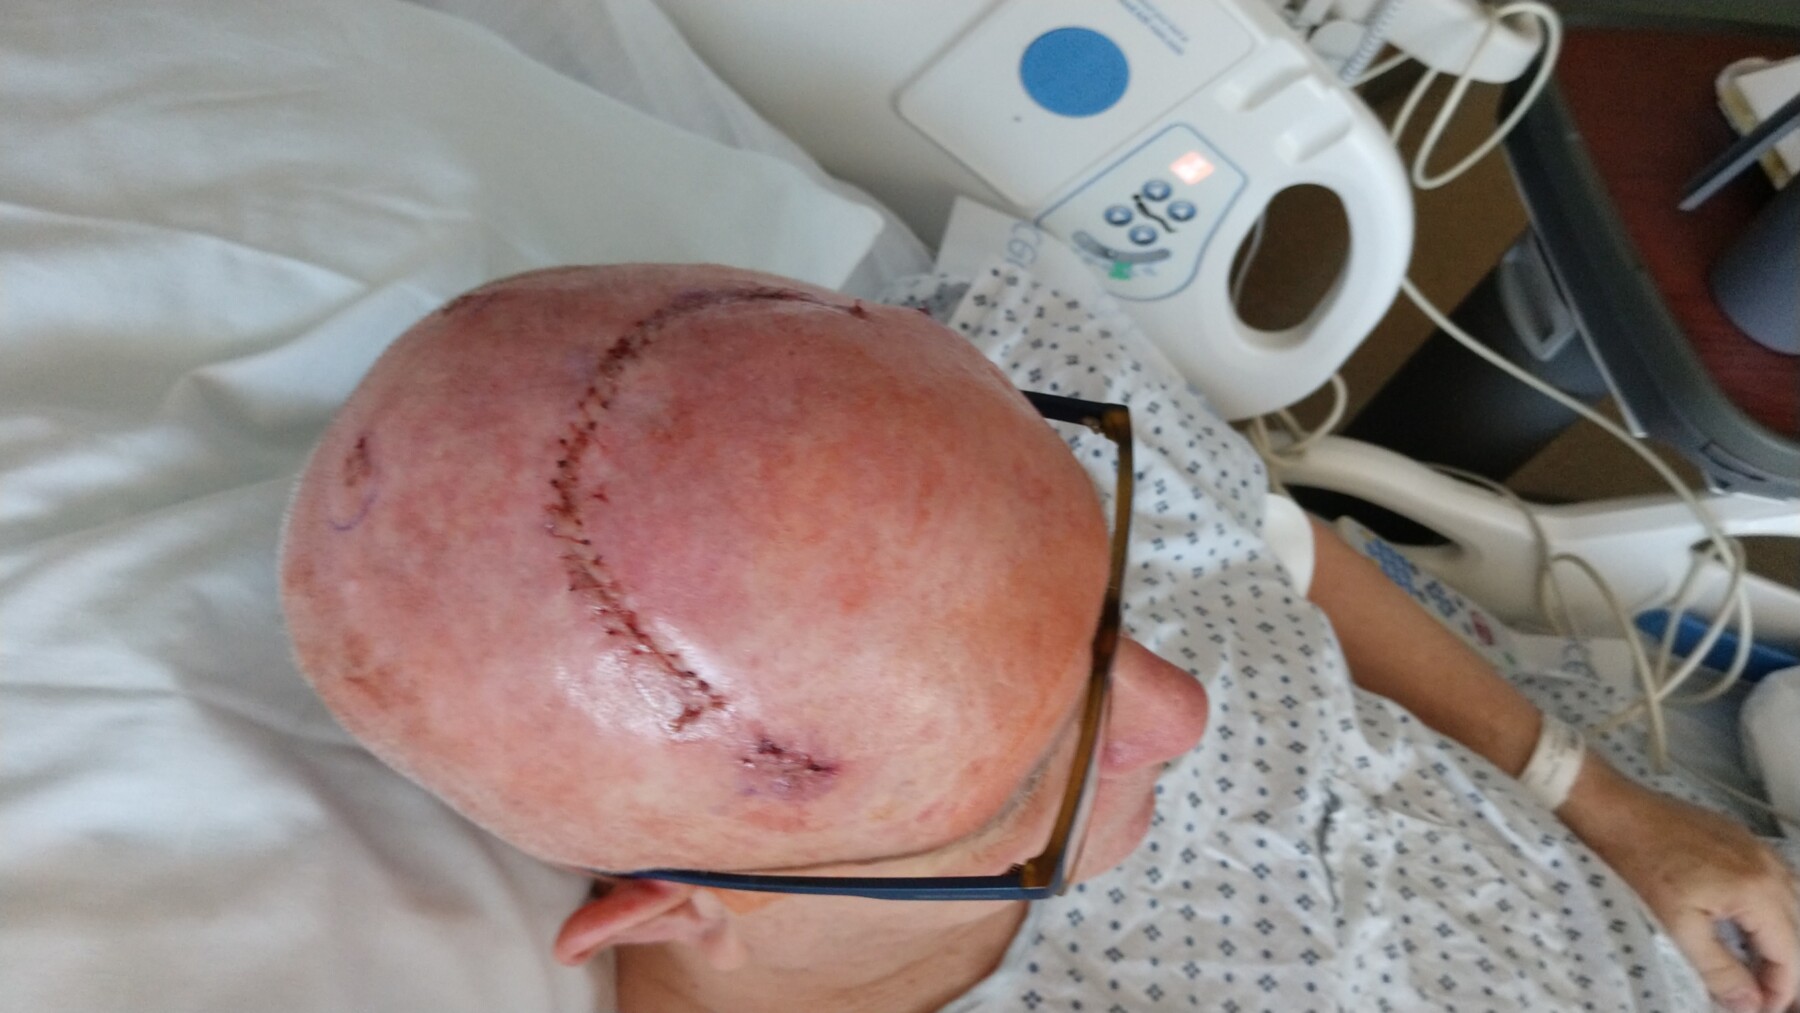 A photo taken from a high angle looks down on a man's head. He is bald and has a fresh curved incision across the top of his head. He's wearing glasses and a hospital gown and is lying in a hospital bed.